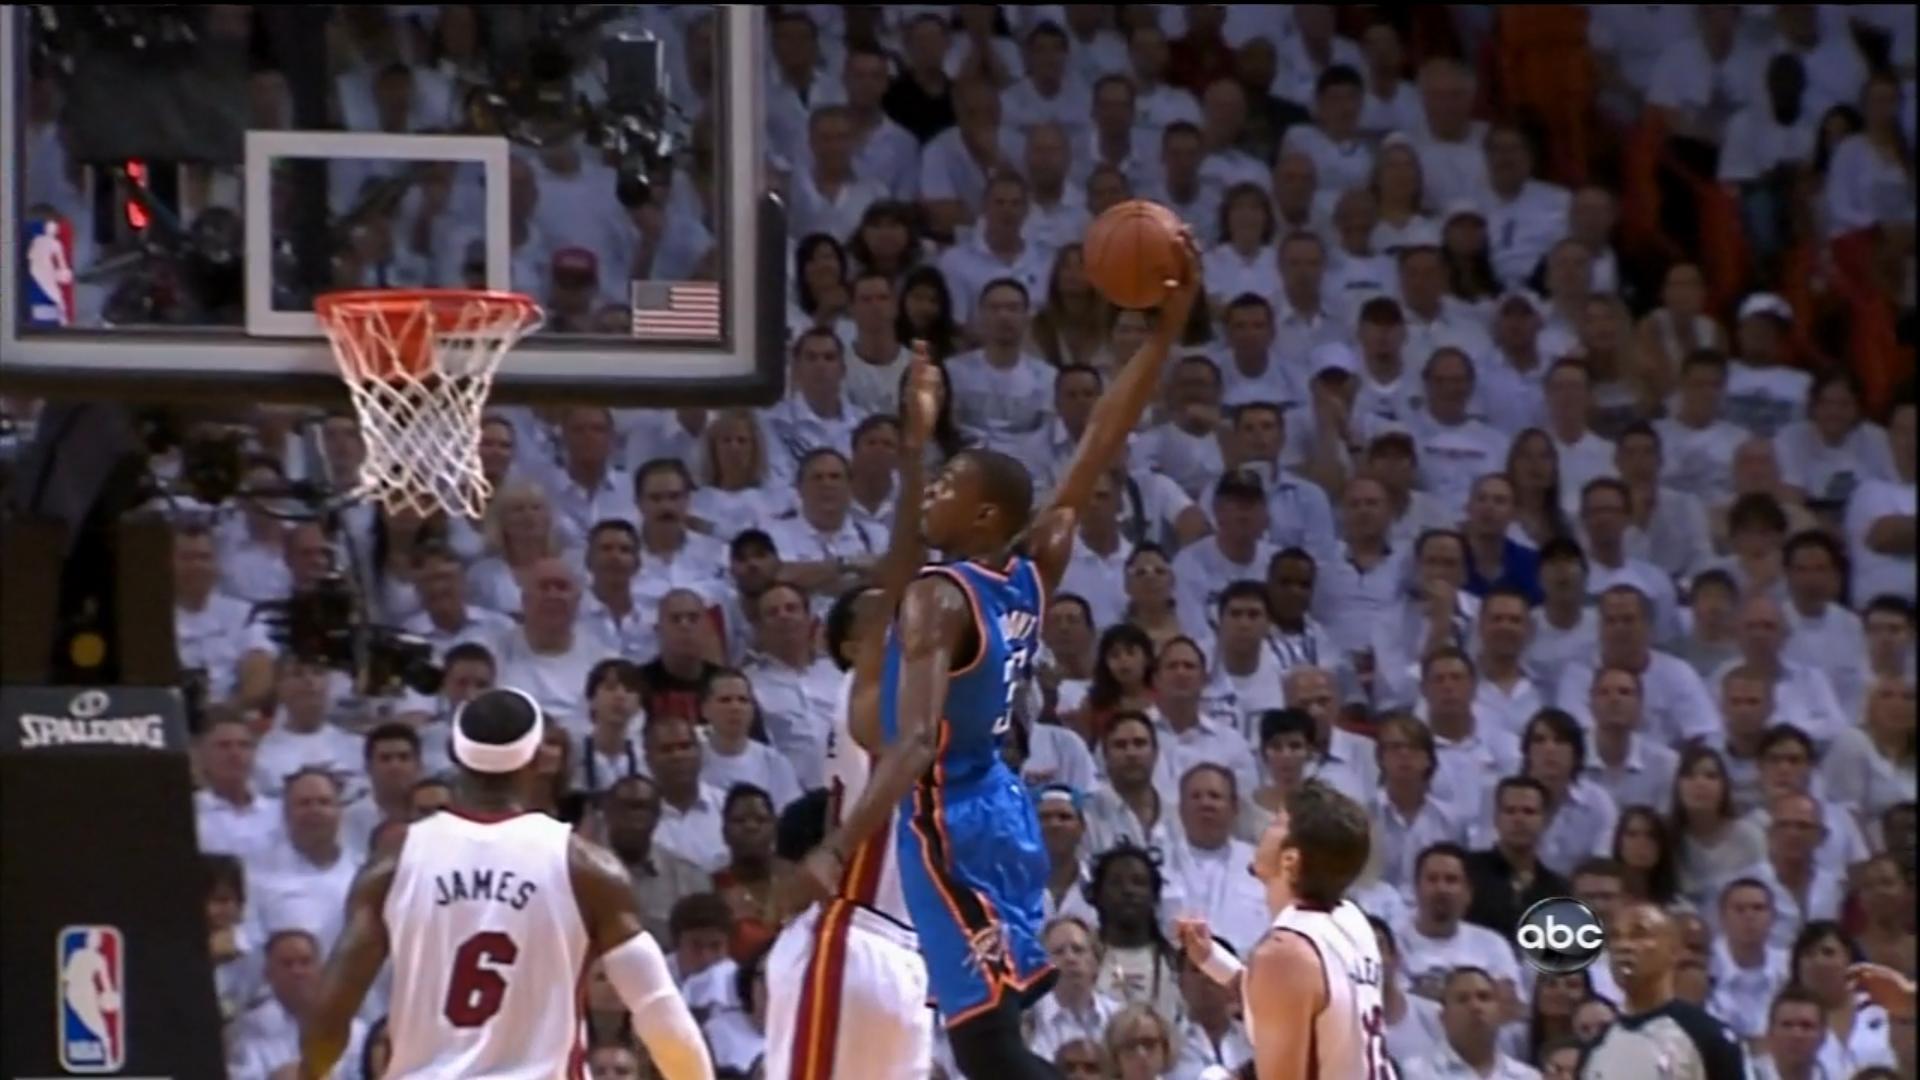 Video: Kevin Durant&;s Tomahawk Dunk Versus the Heat. The Big Lead